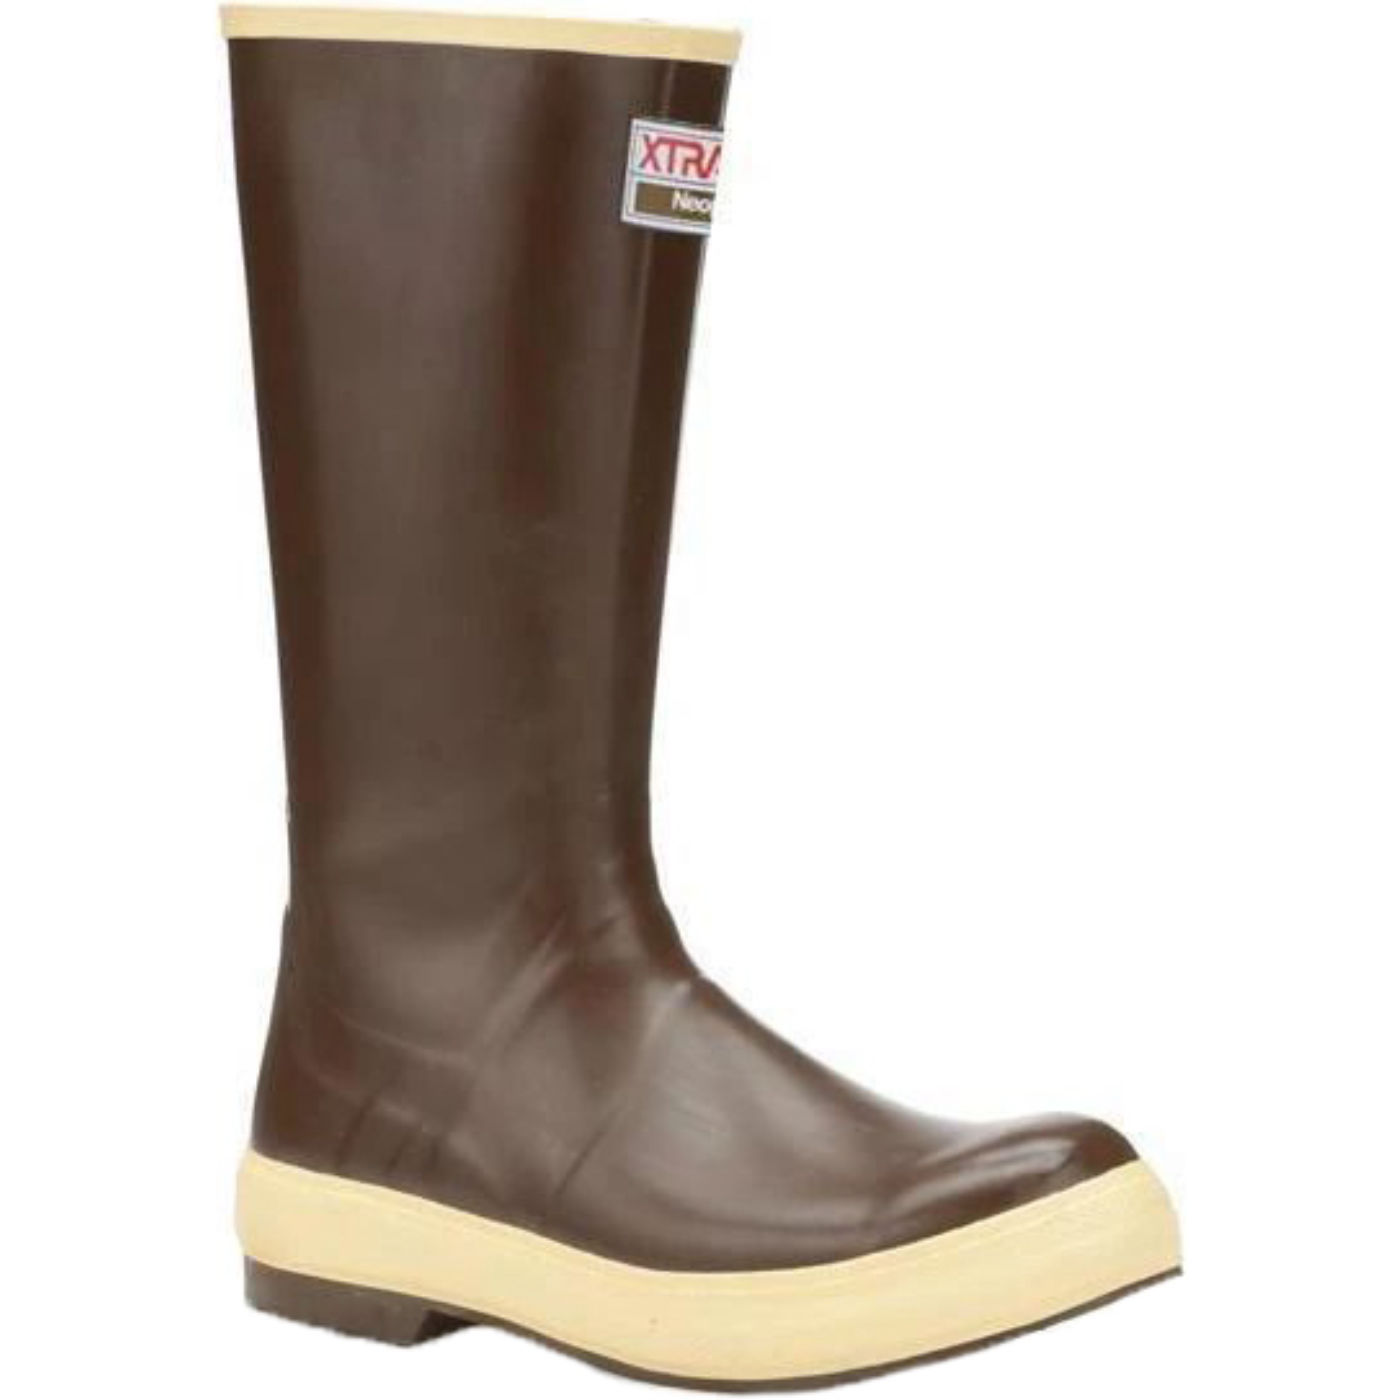 Men's 15 in Legacy Boot Size 13(M) - image 1 of 7